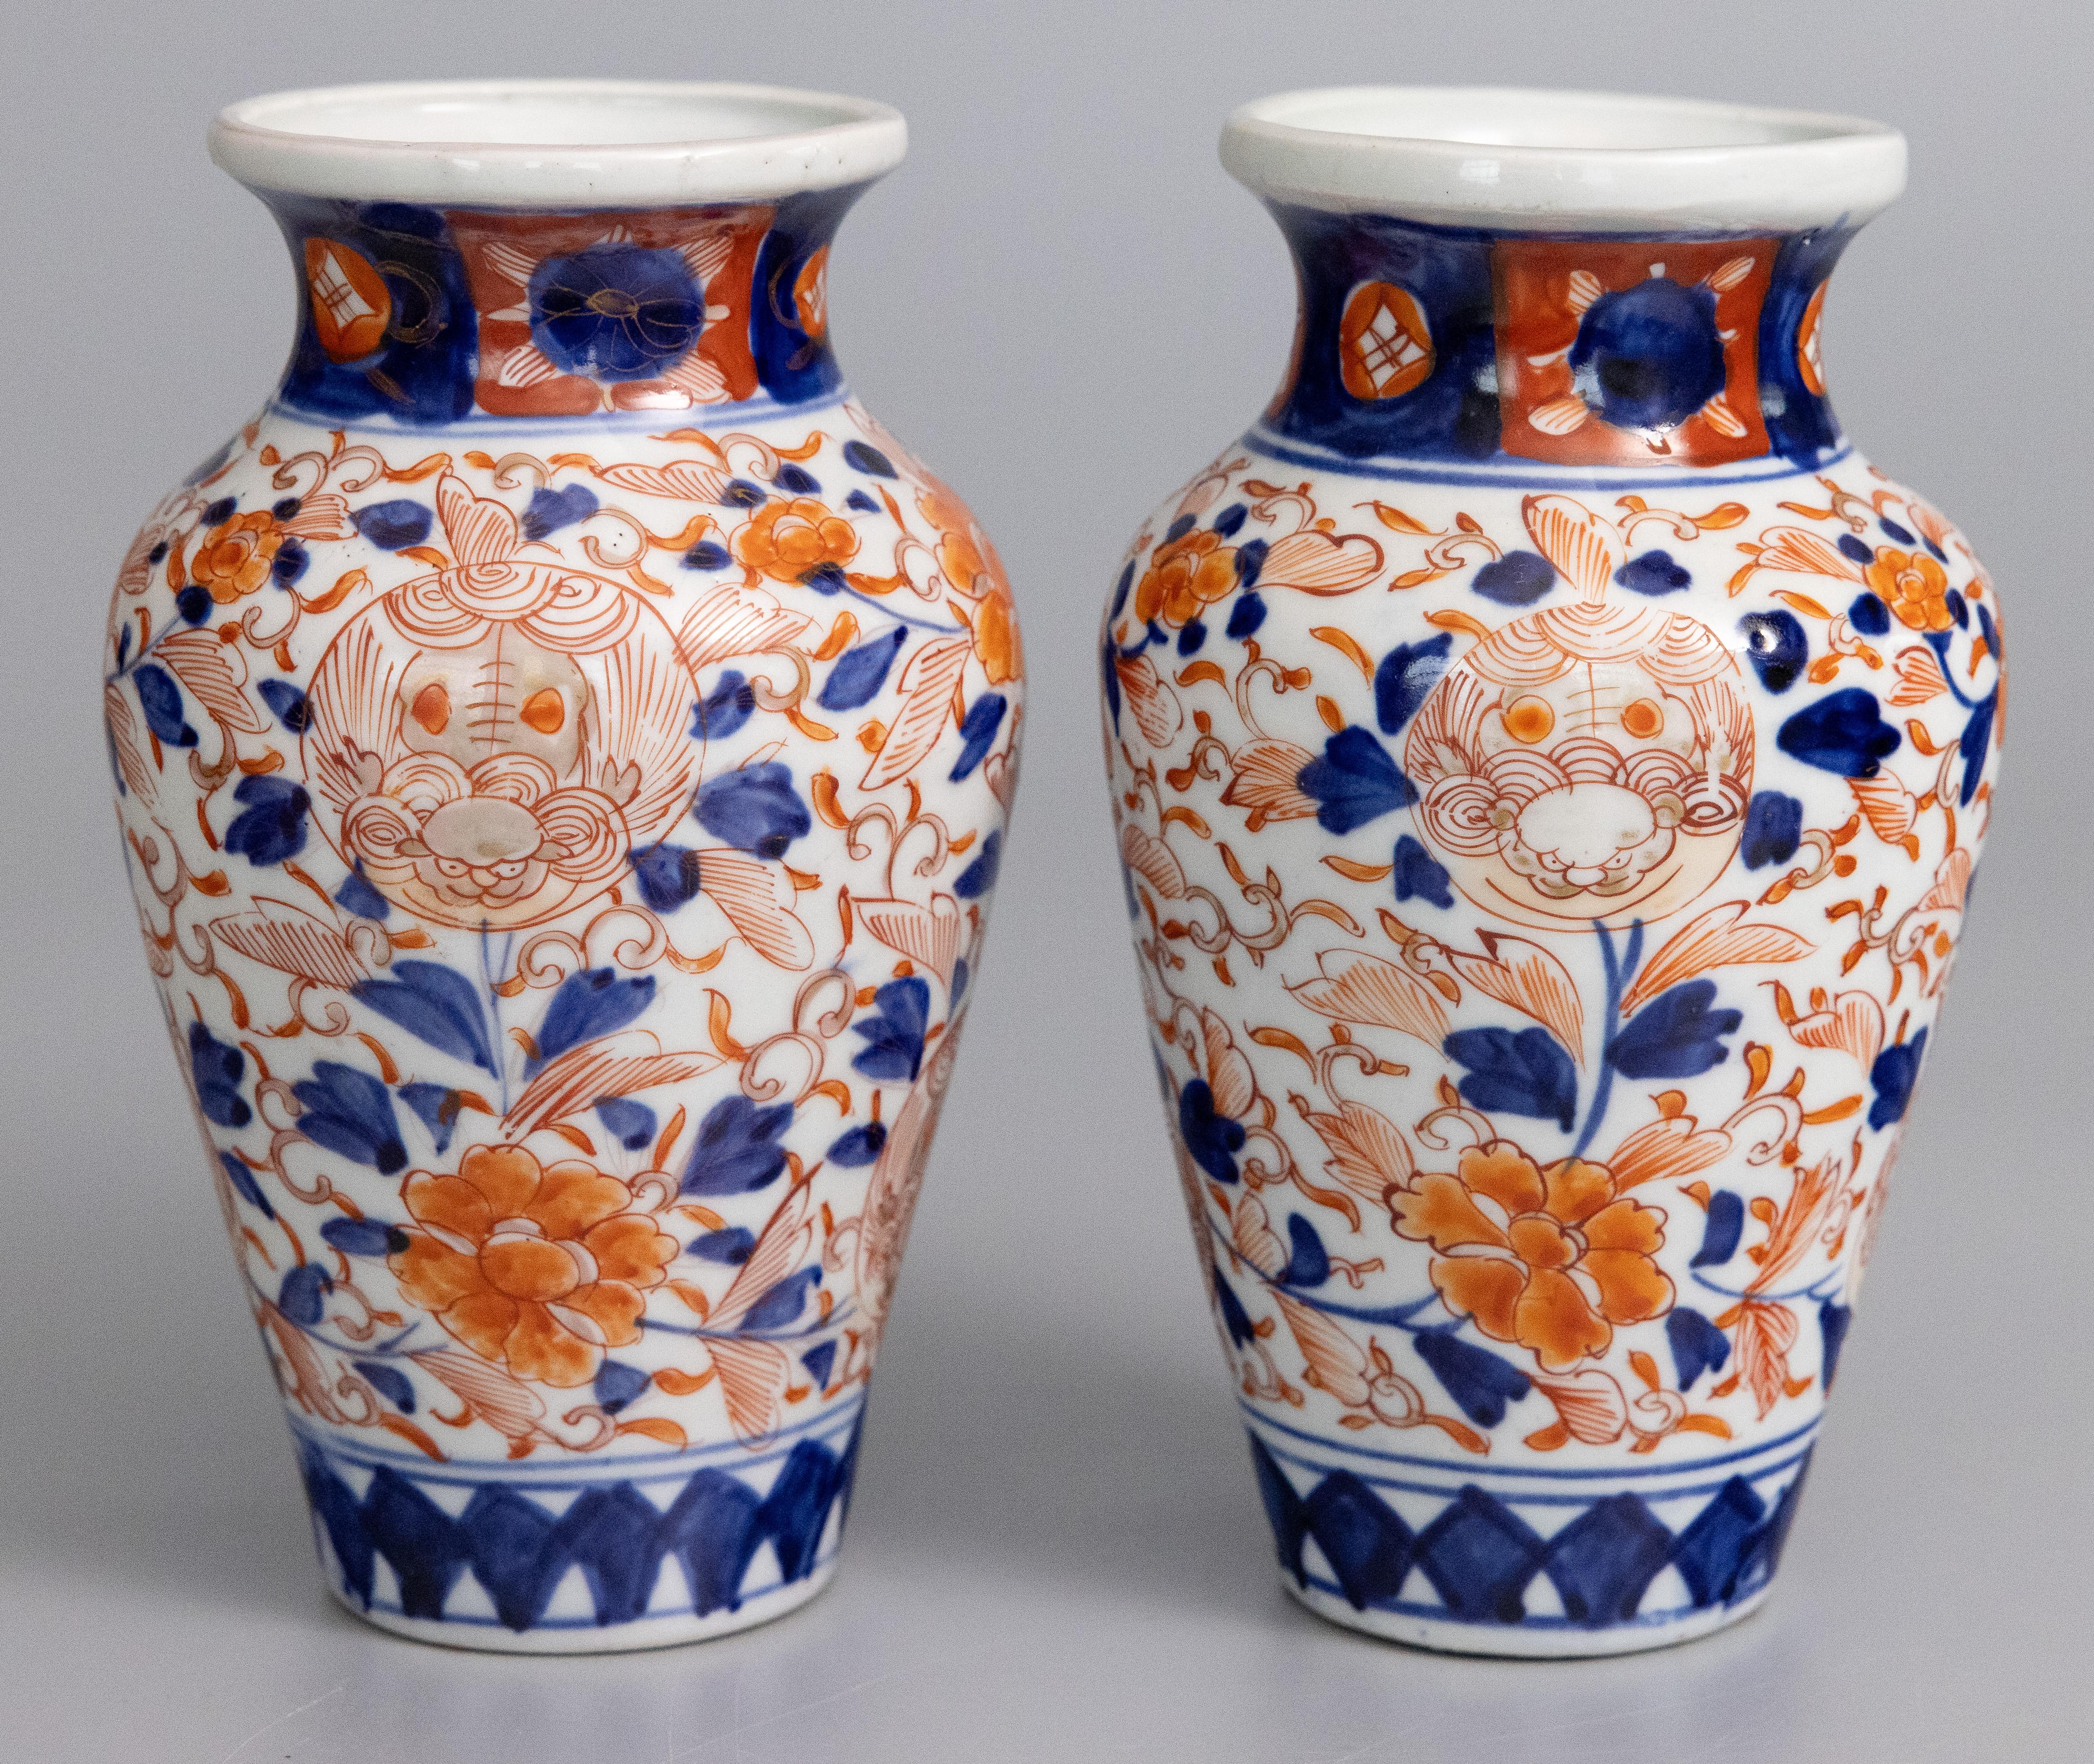 A gorgeous pair of 19th-Century Japanese Imari vases. These fine vases have a lovely shape and hand painted floral design in the traditional Imari colors. They are in excellent condition and would be fabulous for display.

DIMENSIONS
4.5ʺW × 4.5ʺD ×